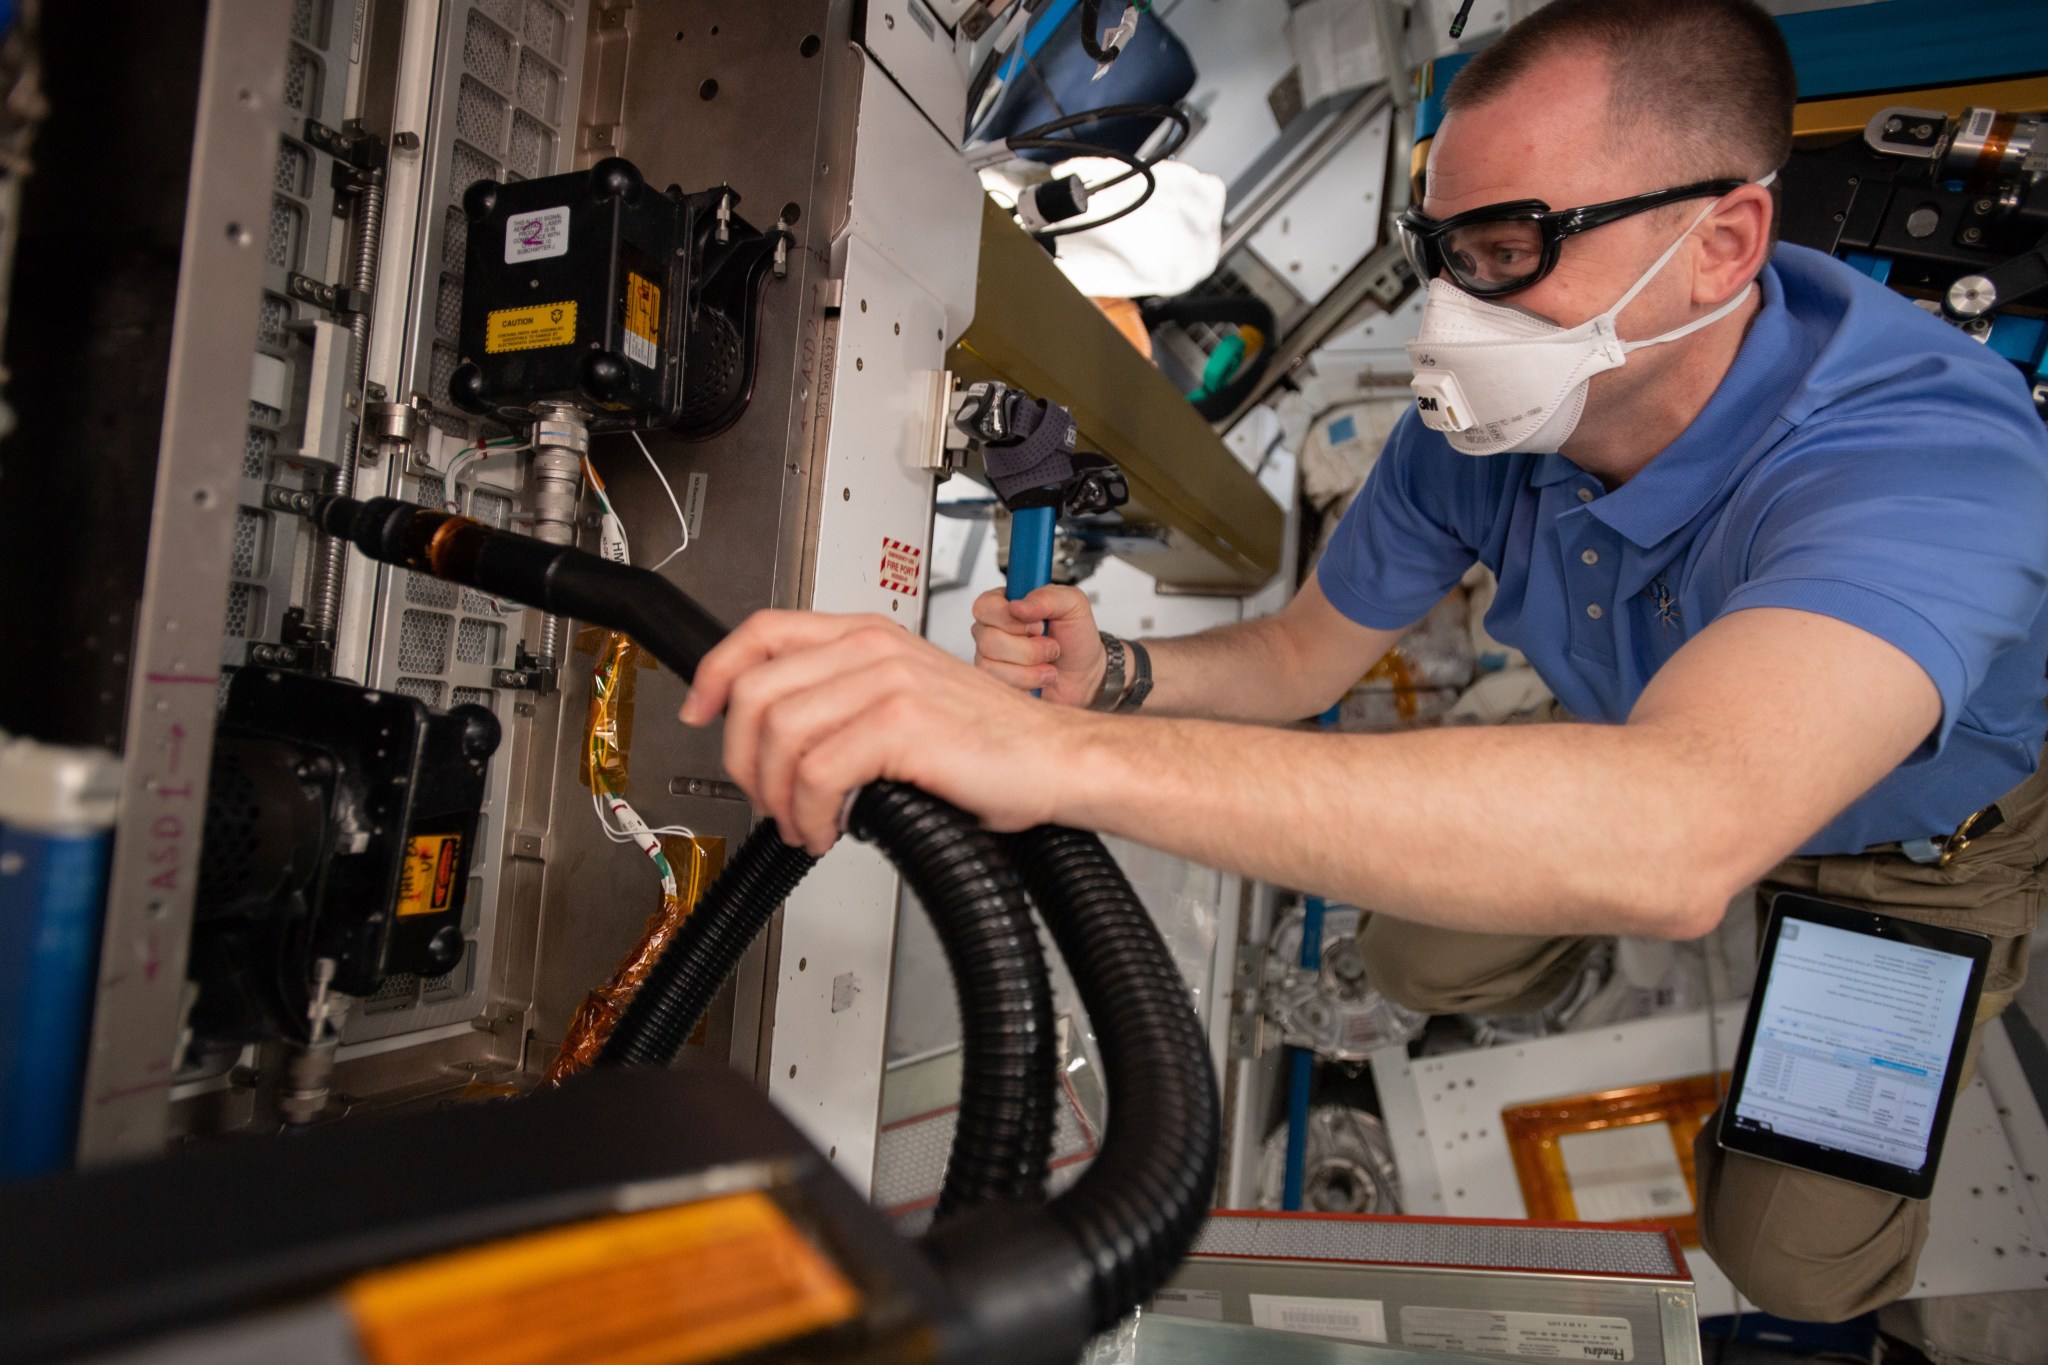 Expedition 59 flight engineer and NASA astronaut Nick Hague replaces filters inside the International Space Station